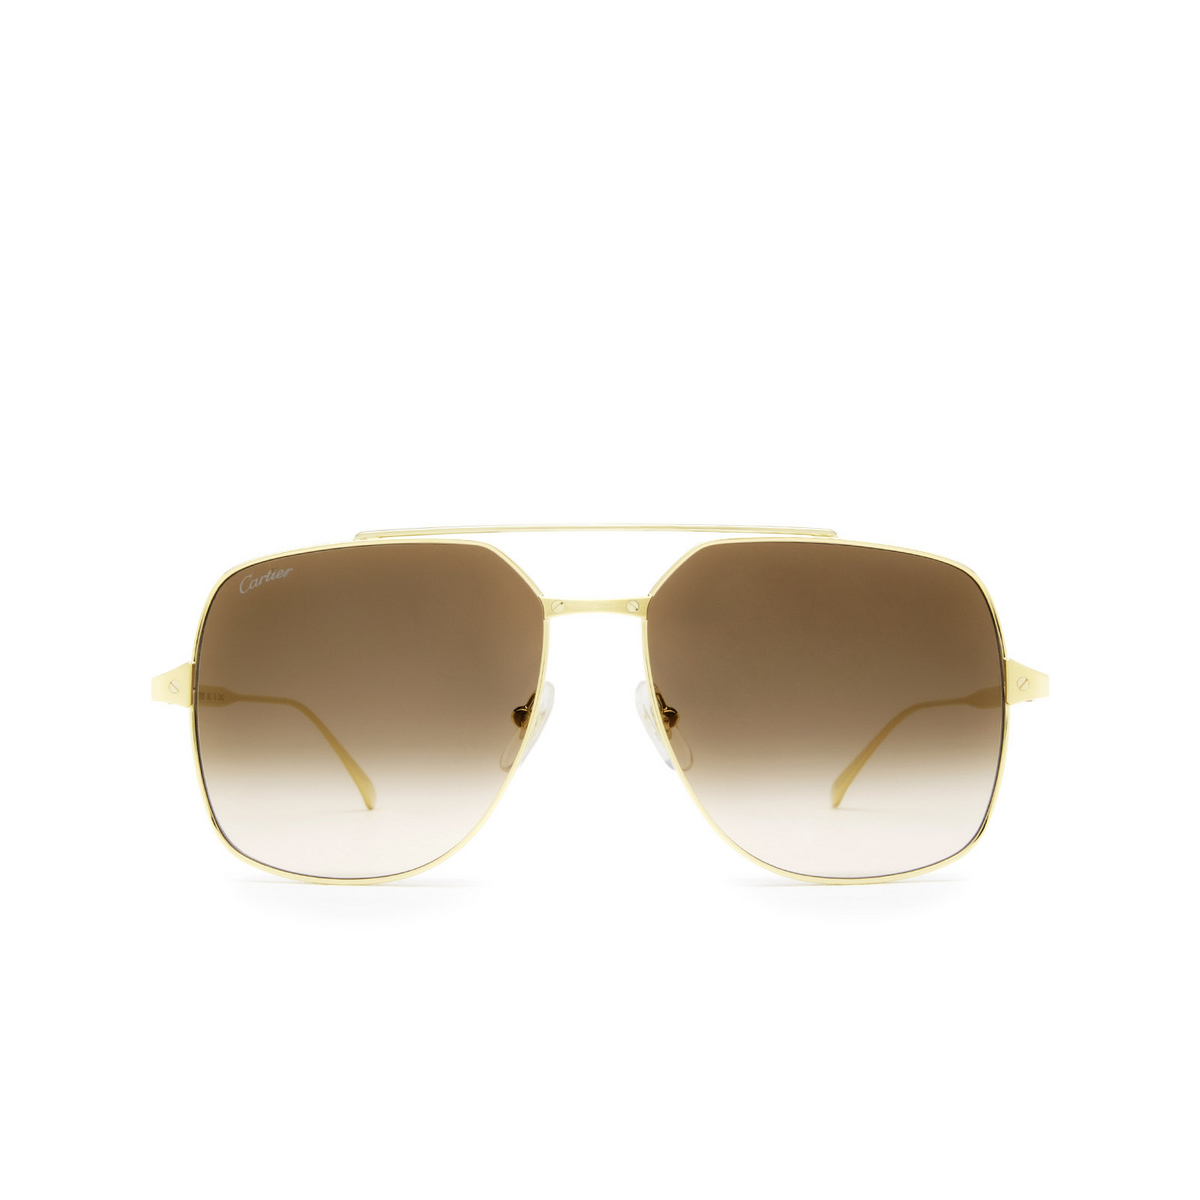 Cartier® Square Sunglasses: CT0329S color Gold 002 - front view.